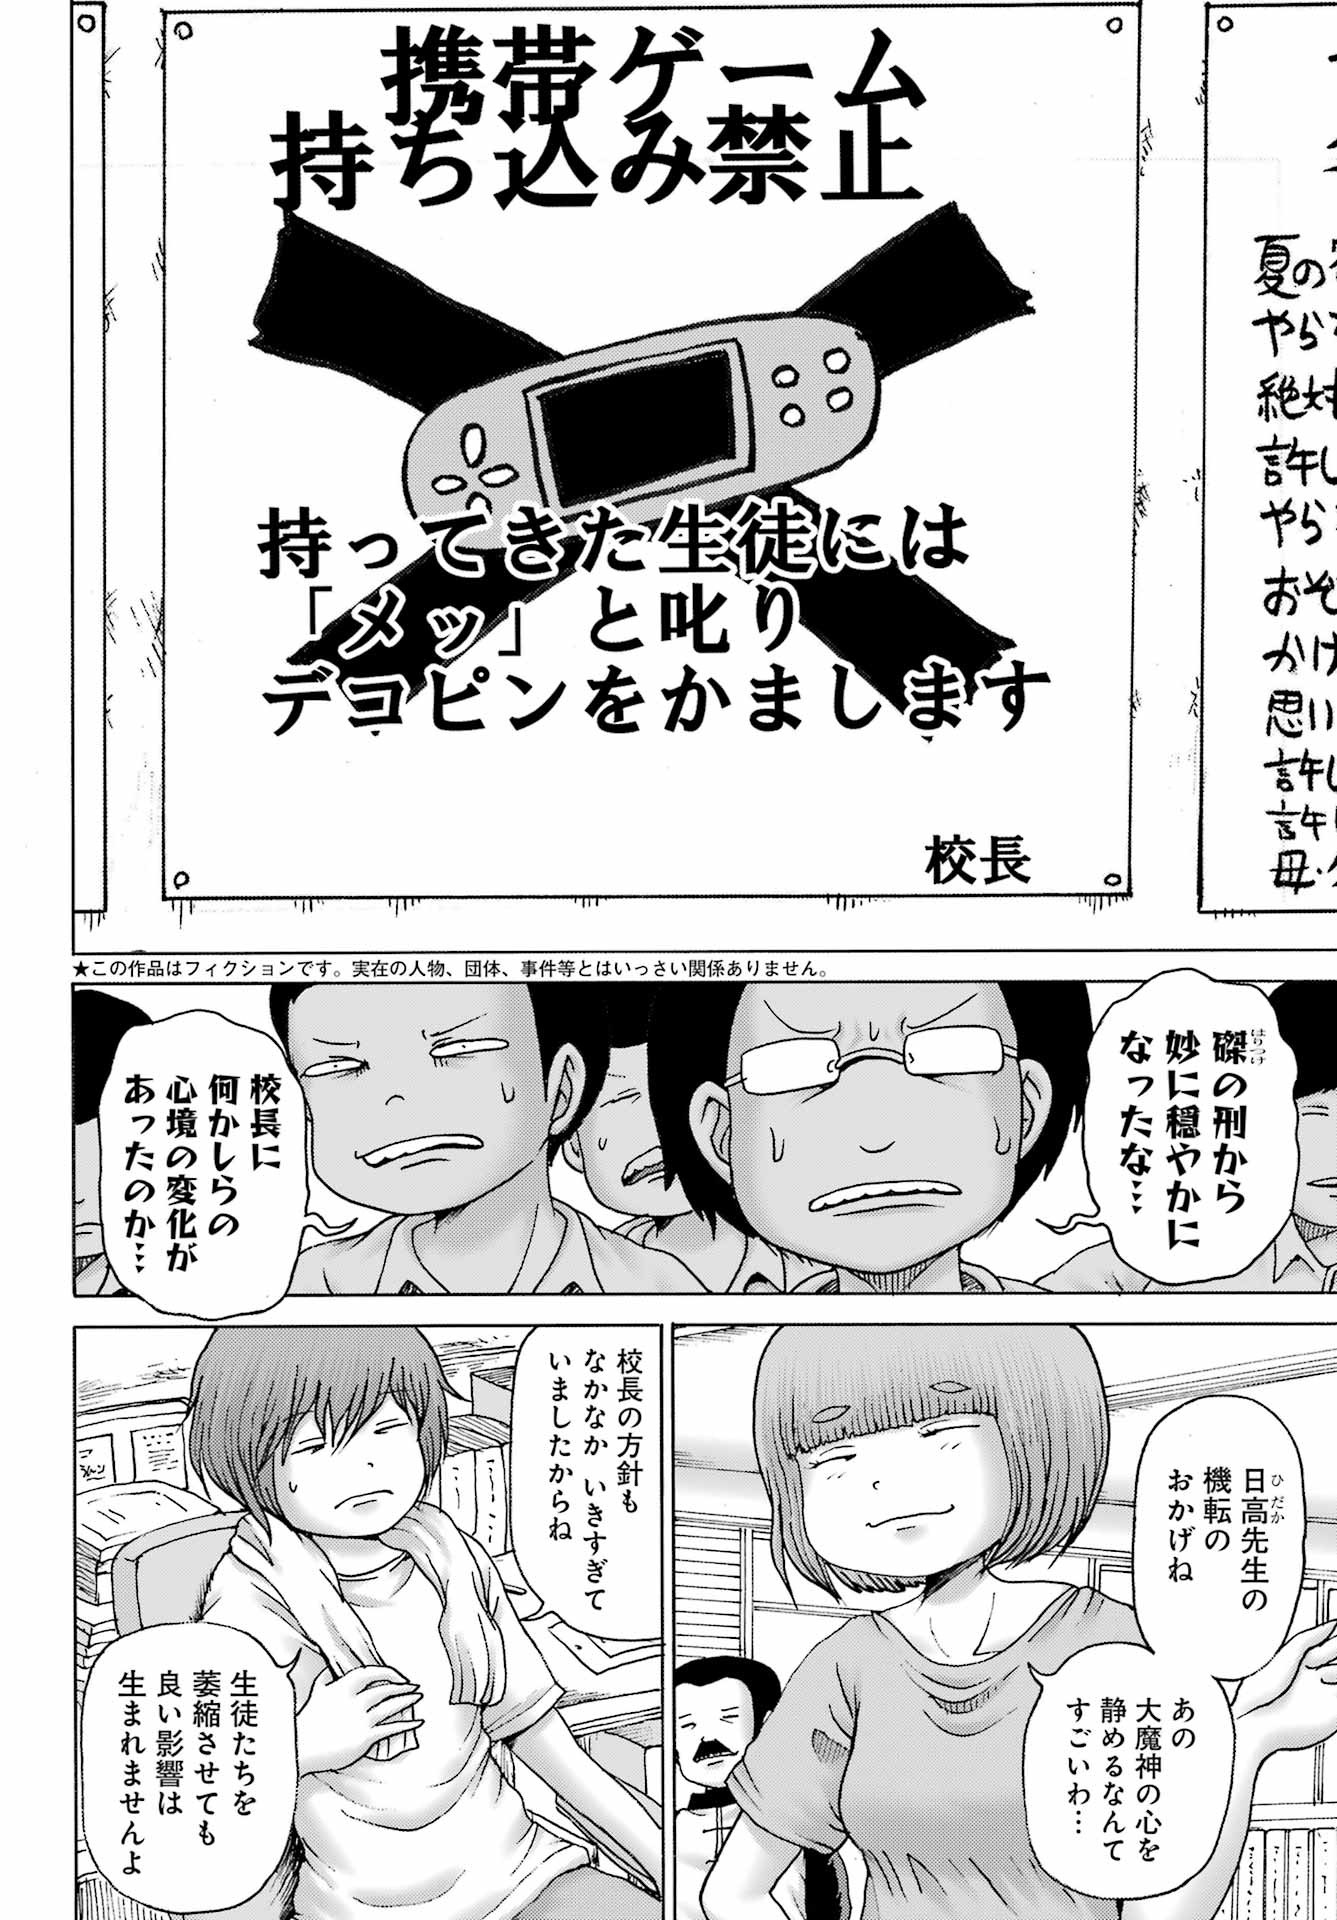 High Score Girl DASH - Chapter 42 - Page 2